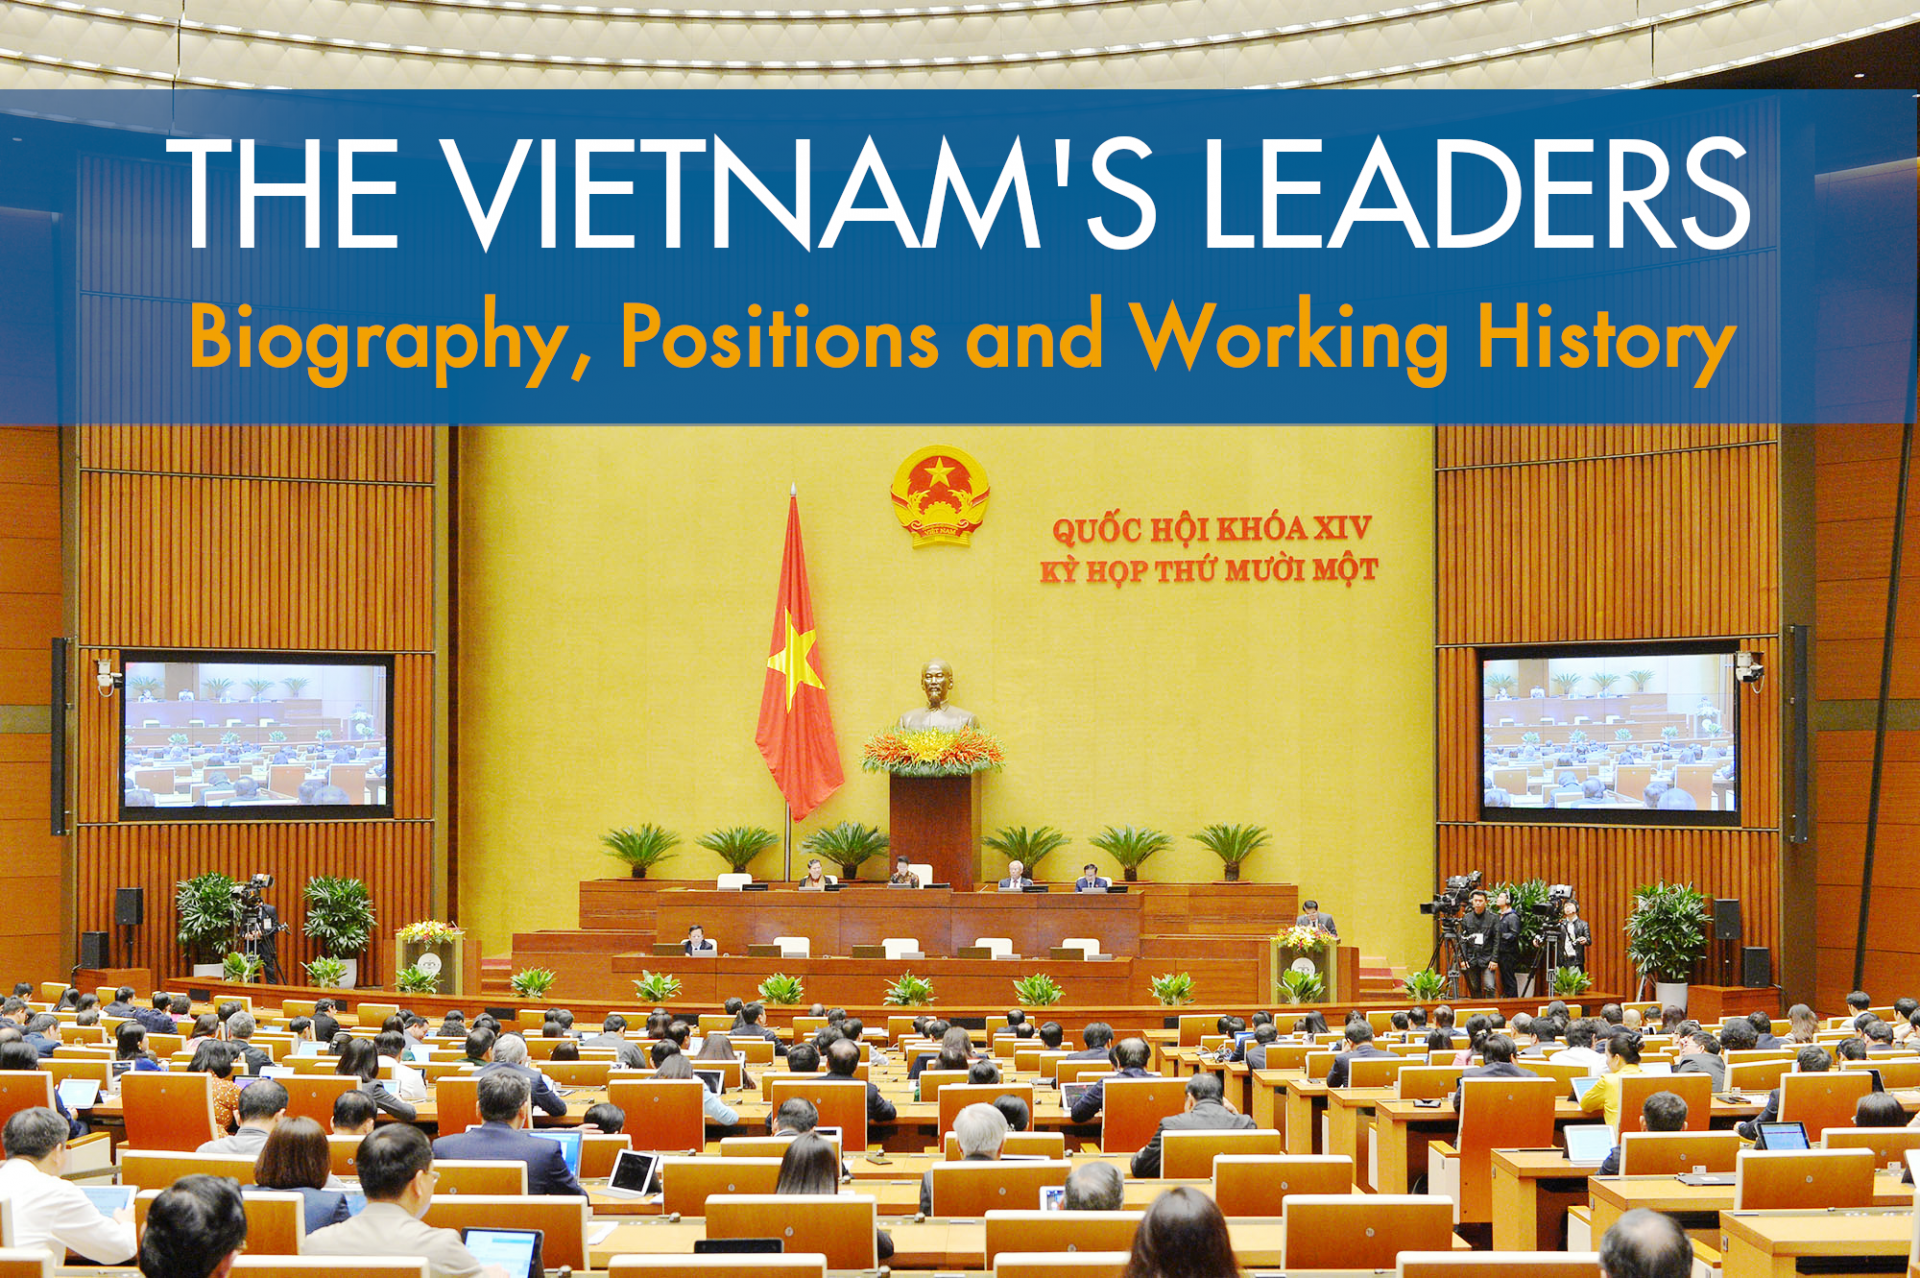 vietnams leaders biography leadership positions and working history